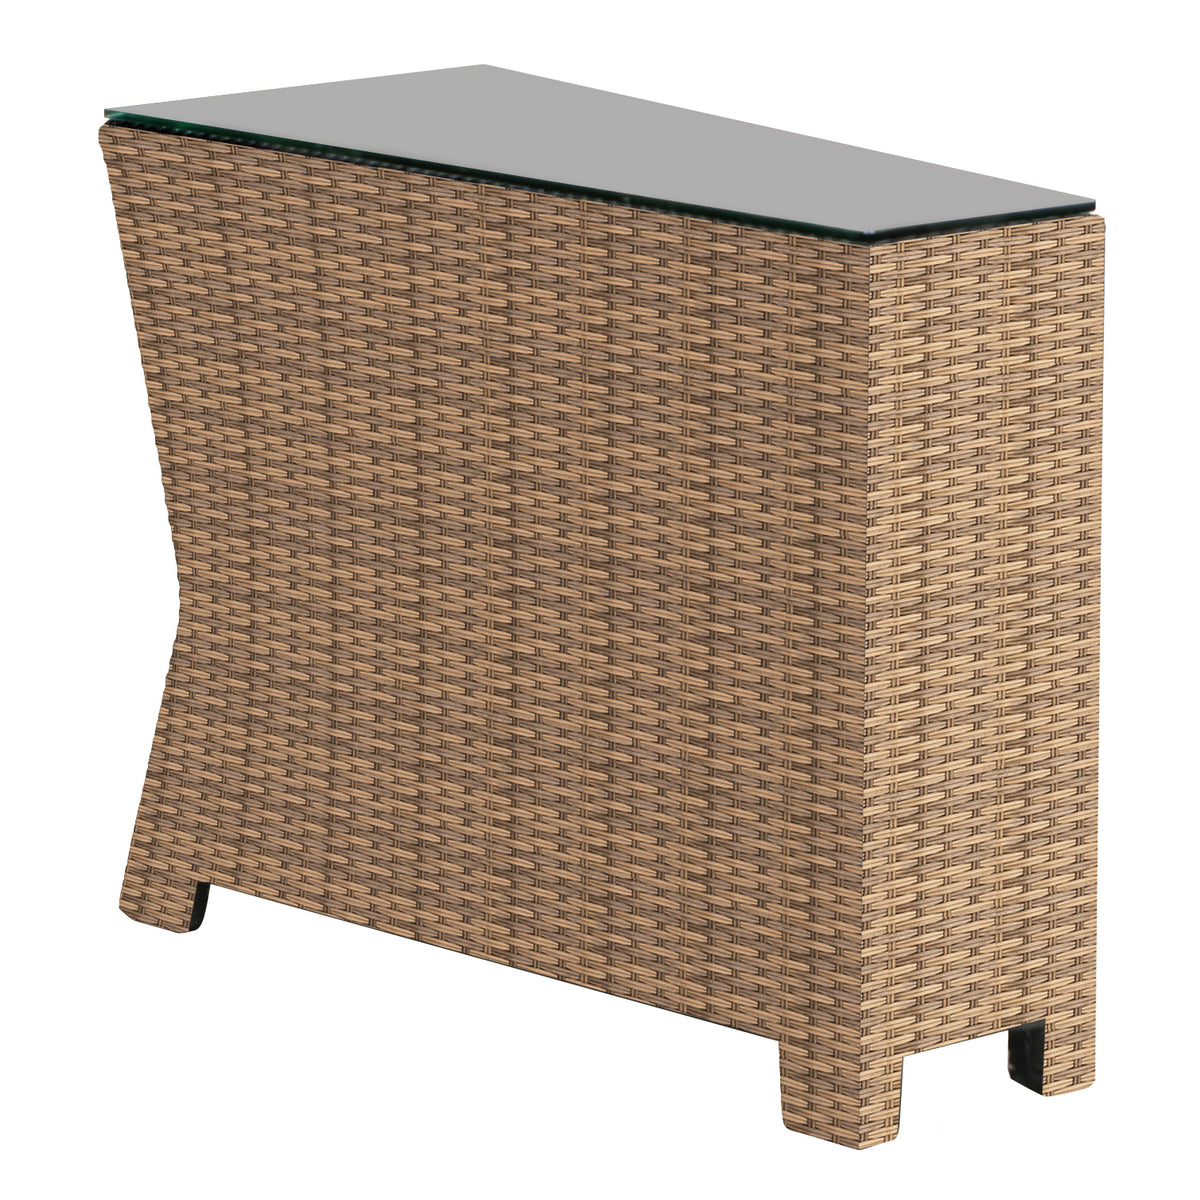 Forever Patio Barbados Wicker Wedge End Table